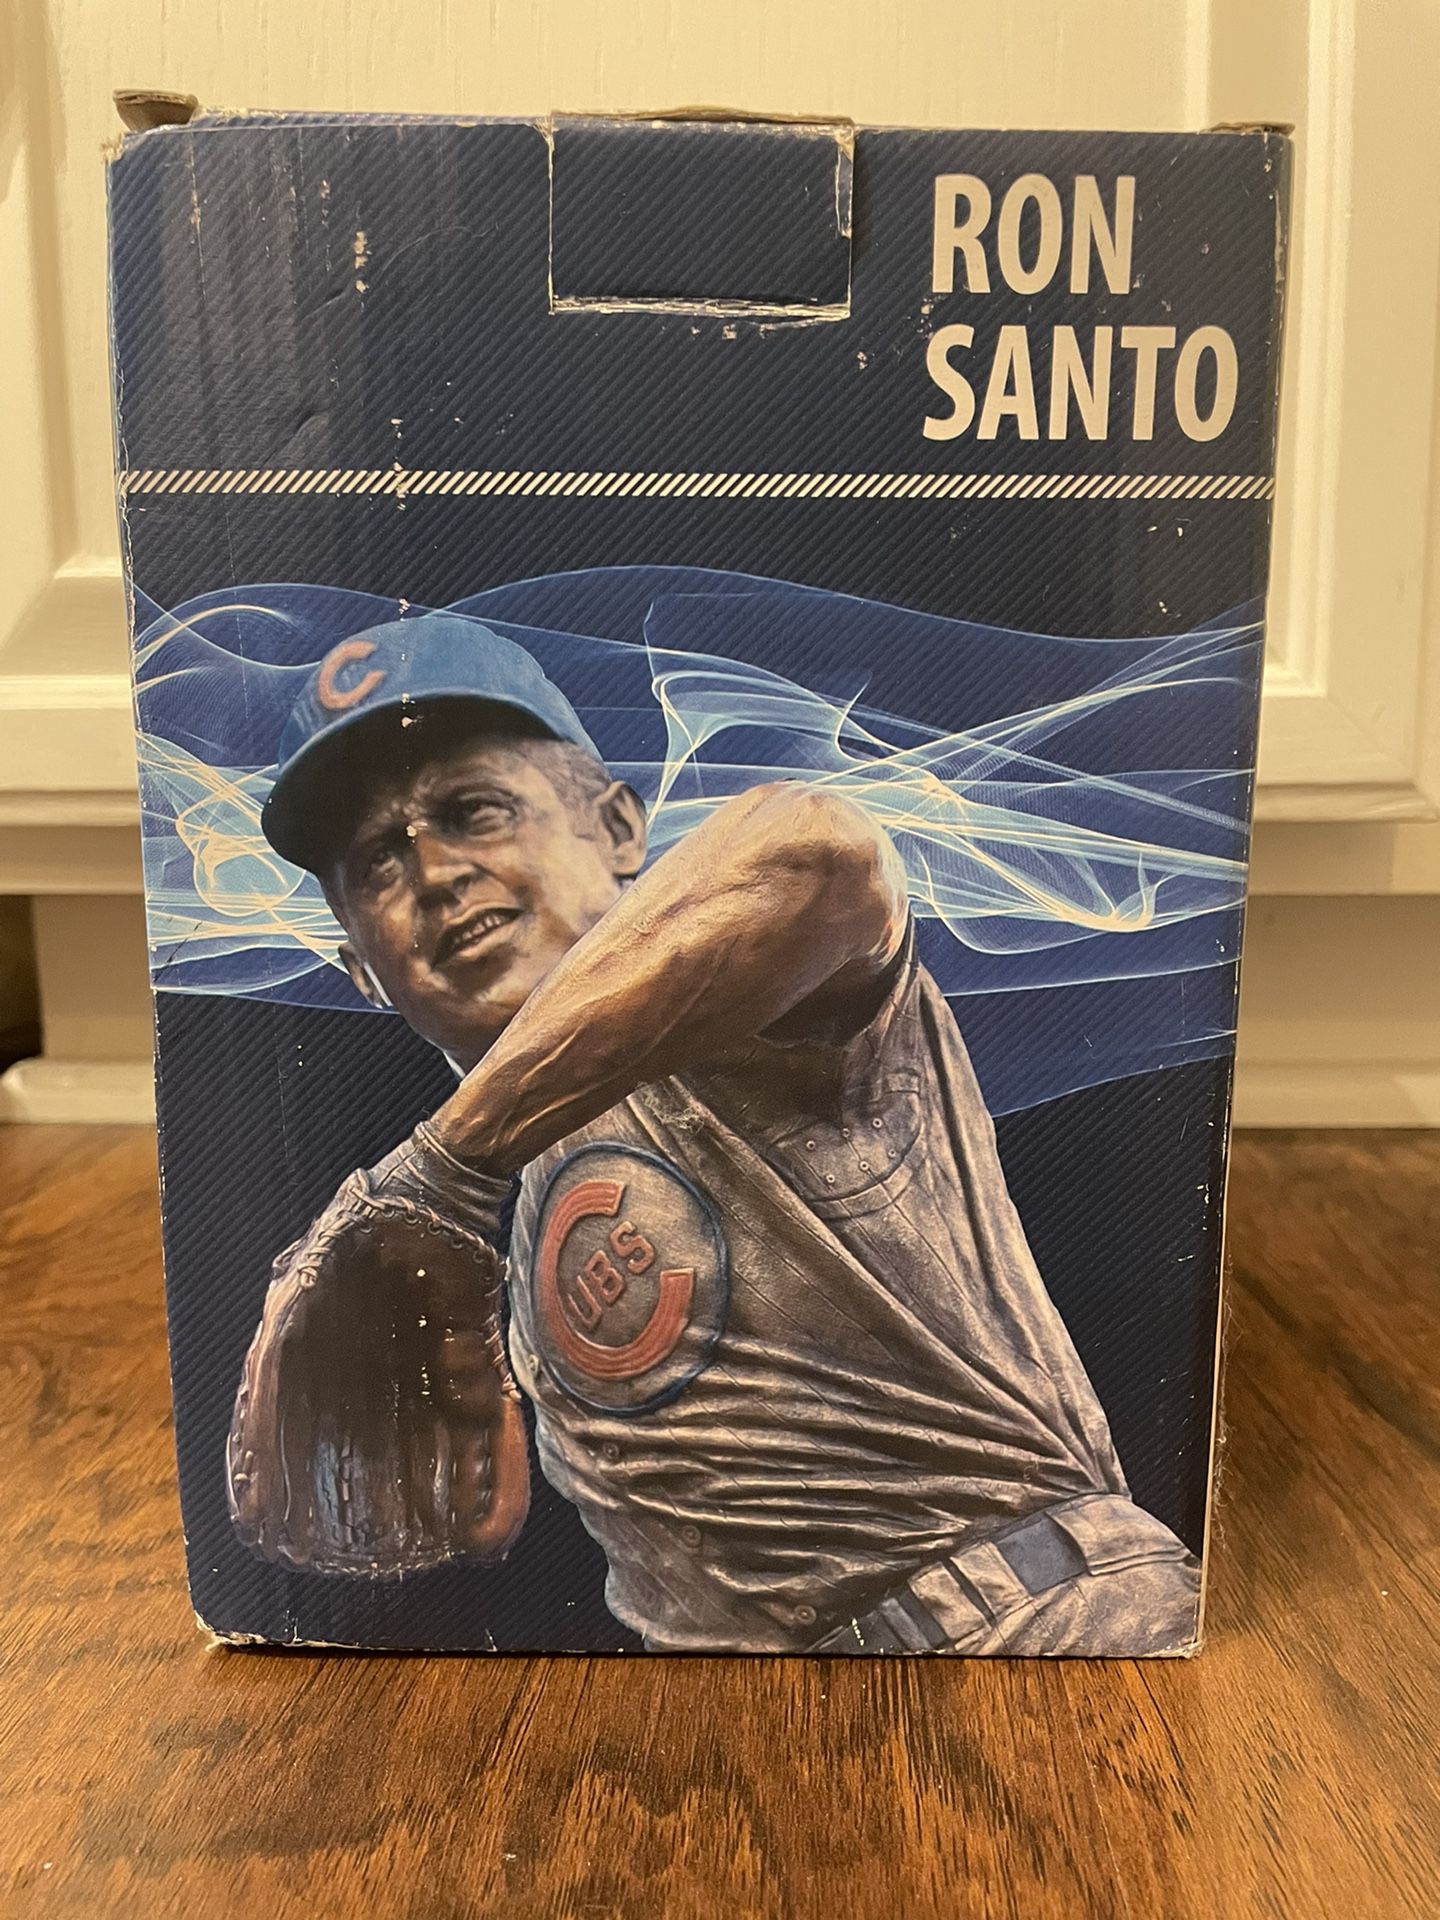 Chicago Cubs Ron Santo #10 Replica Statue for Sale in Huntington Beach, CA  - OfferUp